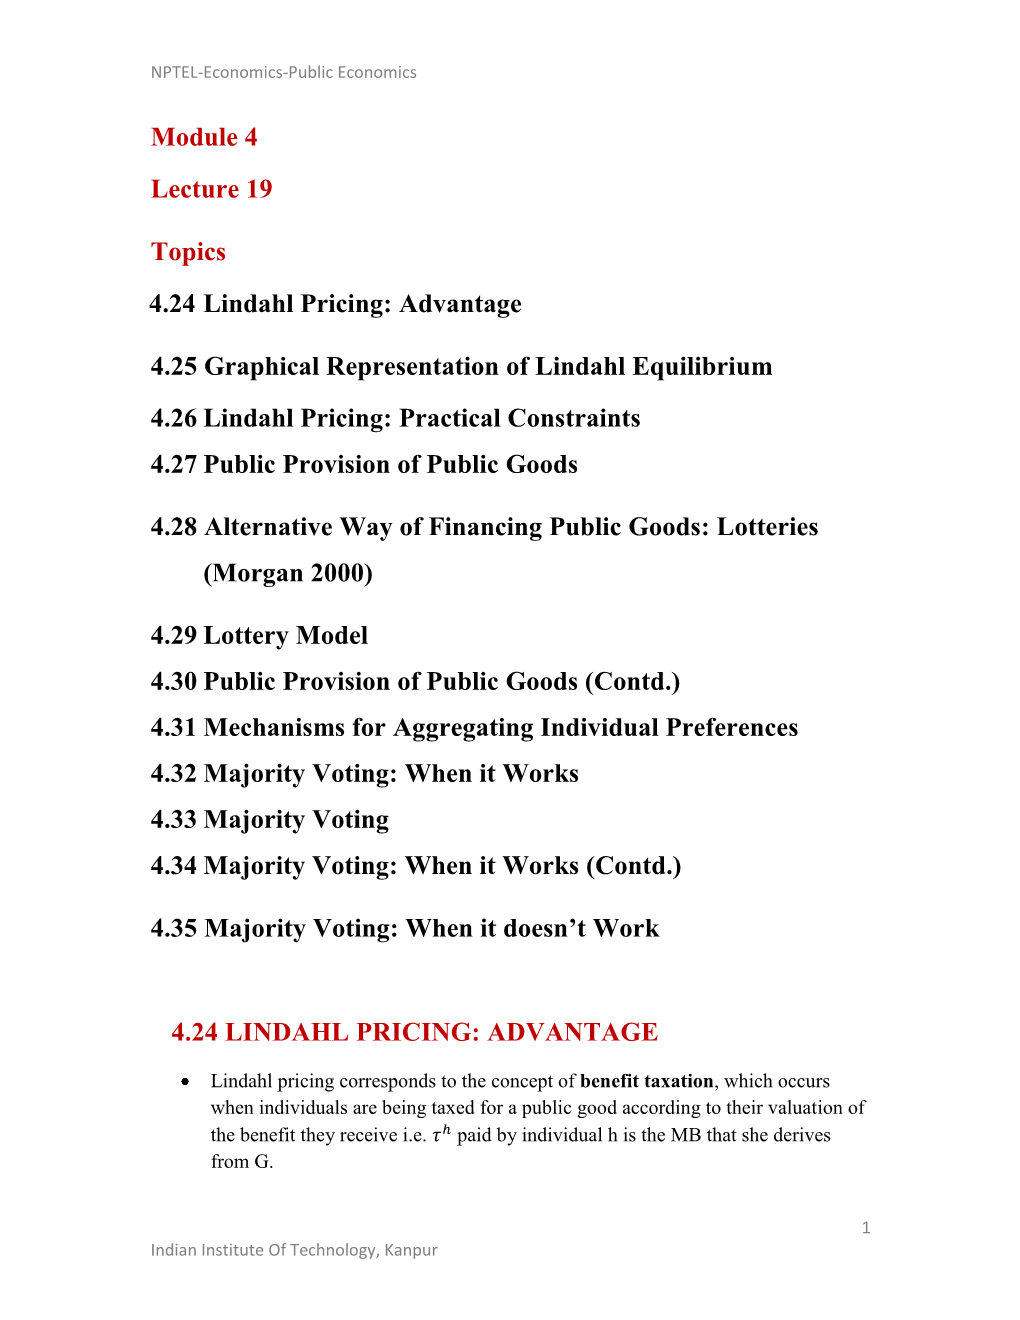 Module 4 Lecture 19 Topics 4.24 Lindahl Pricing